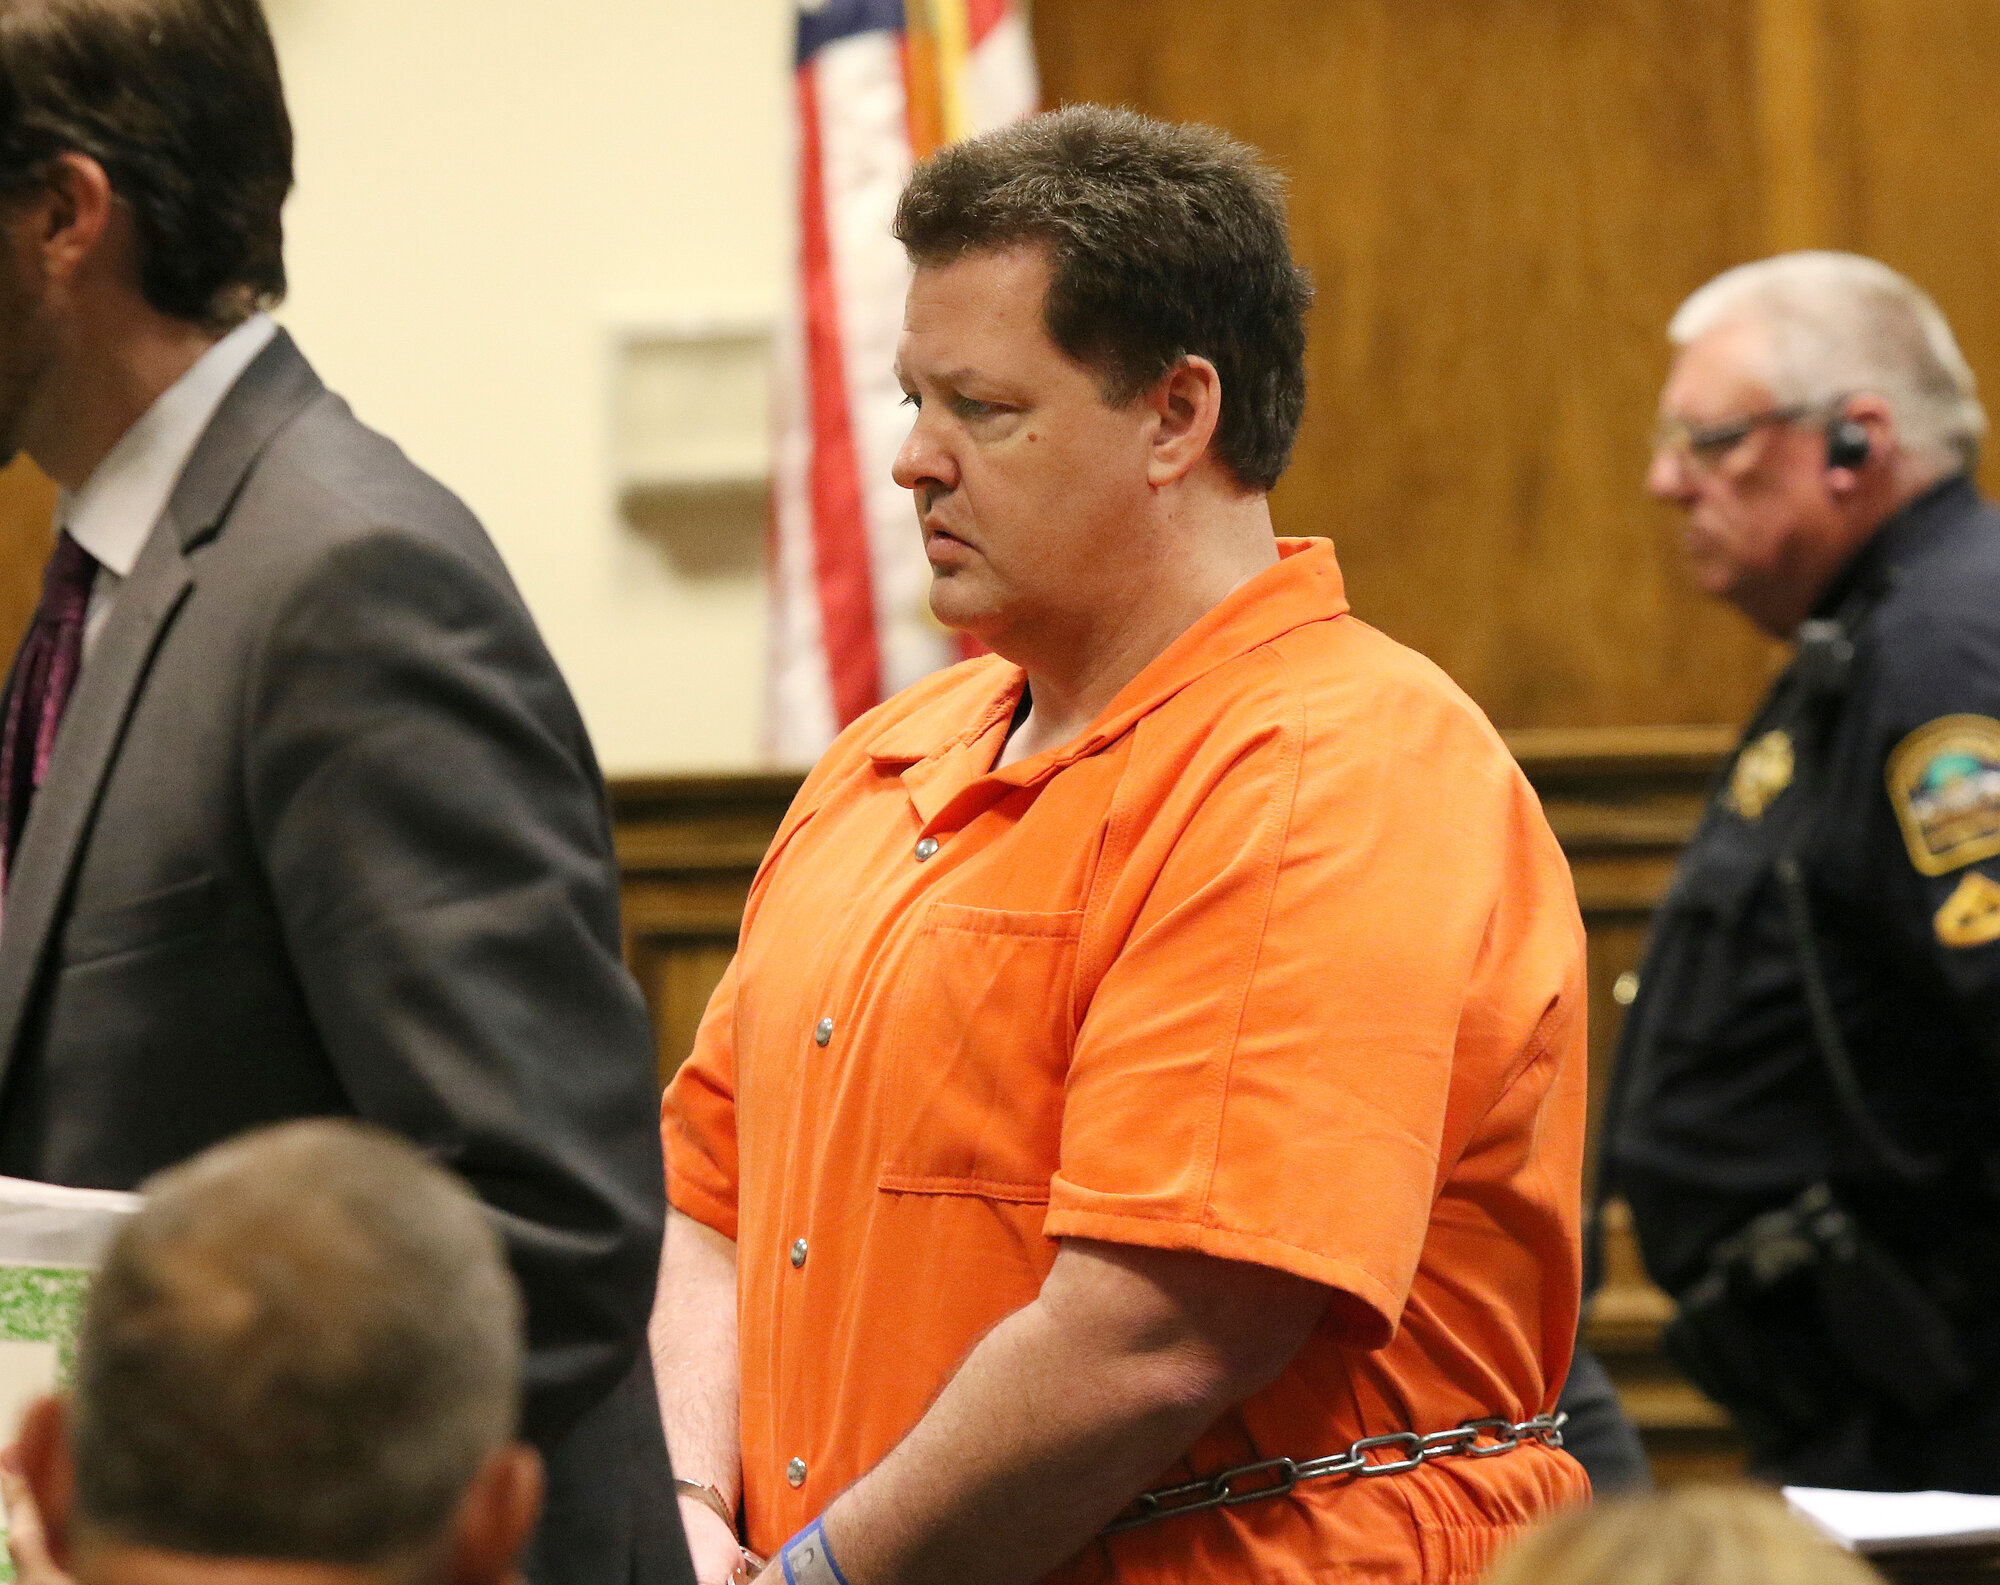 Todd Kohlhepp appears in court, Friday, May 26, 2017, in Spartanburg. Kohlhepp, who is serving a life sentence, illegally obtained guns from Academy Sports Outdoors, according to a lawsuit. The sporting goods chain is paying the families of three people shot to death by Kohlhepp $2.5 million after the store sold guns to a straw buyer for the killer, who was a felon and couldn't legally buy the weapons.